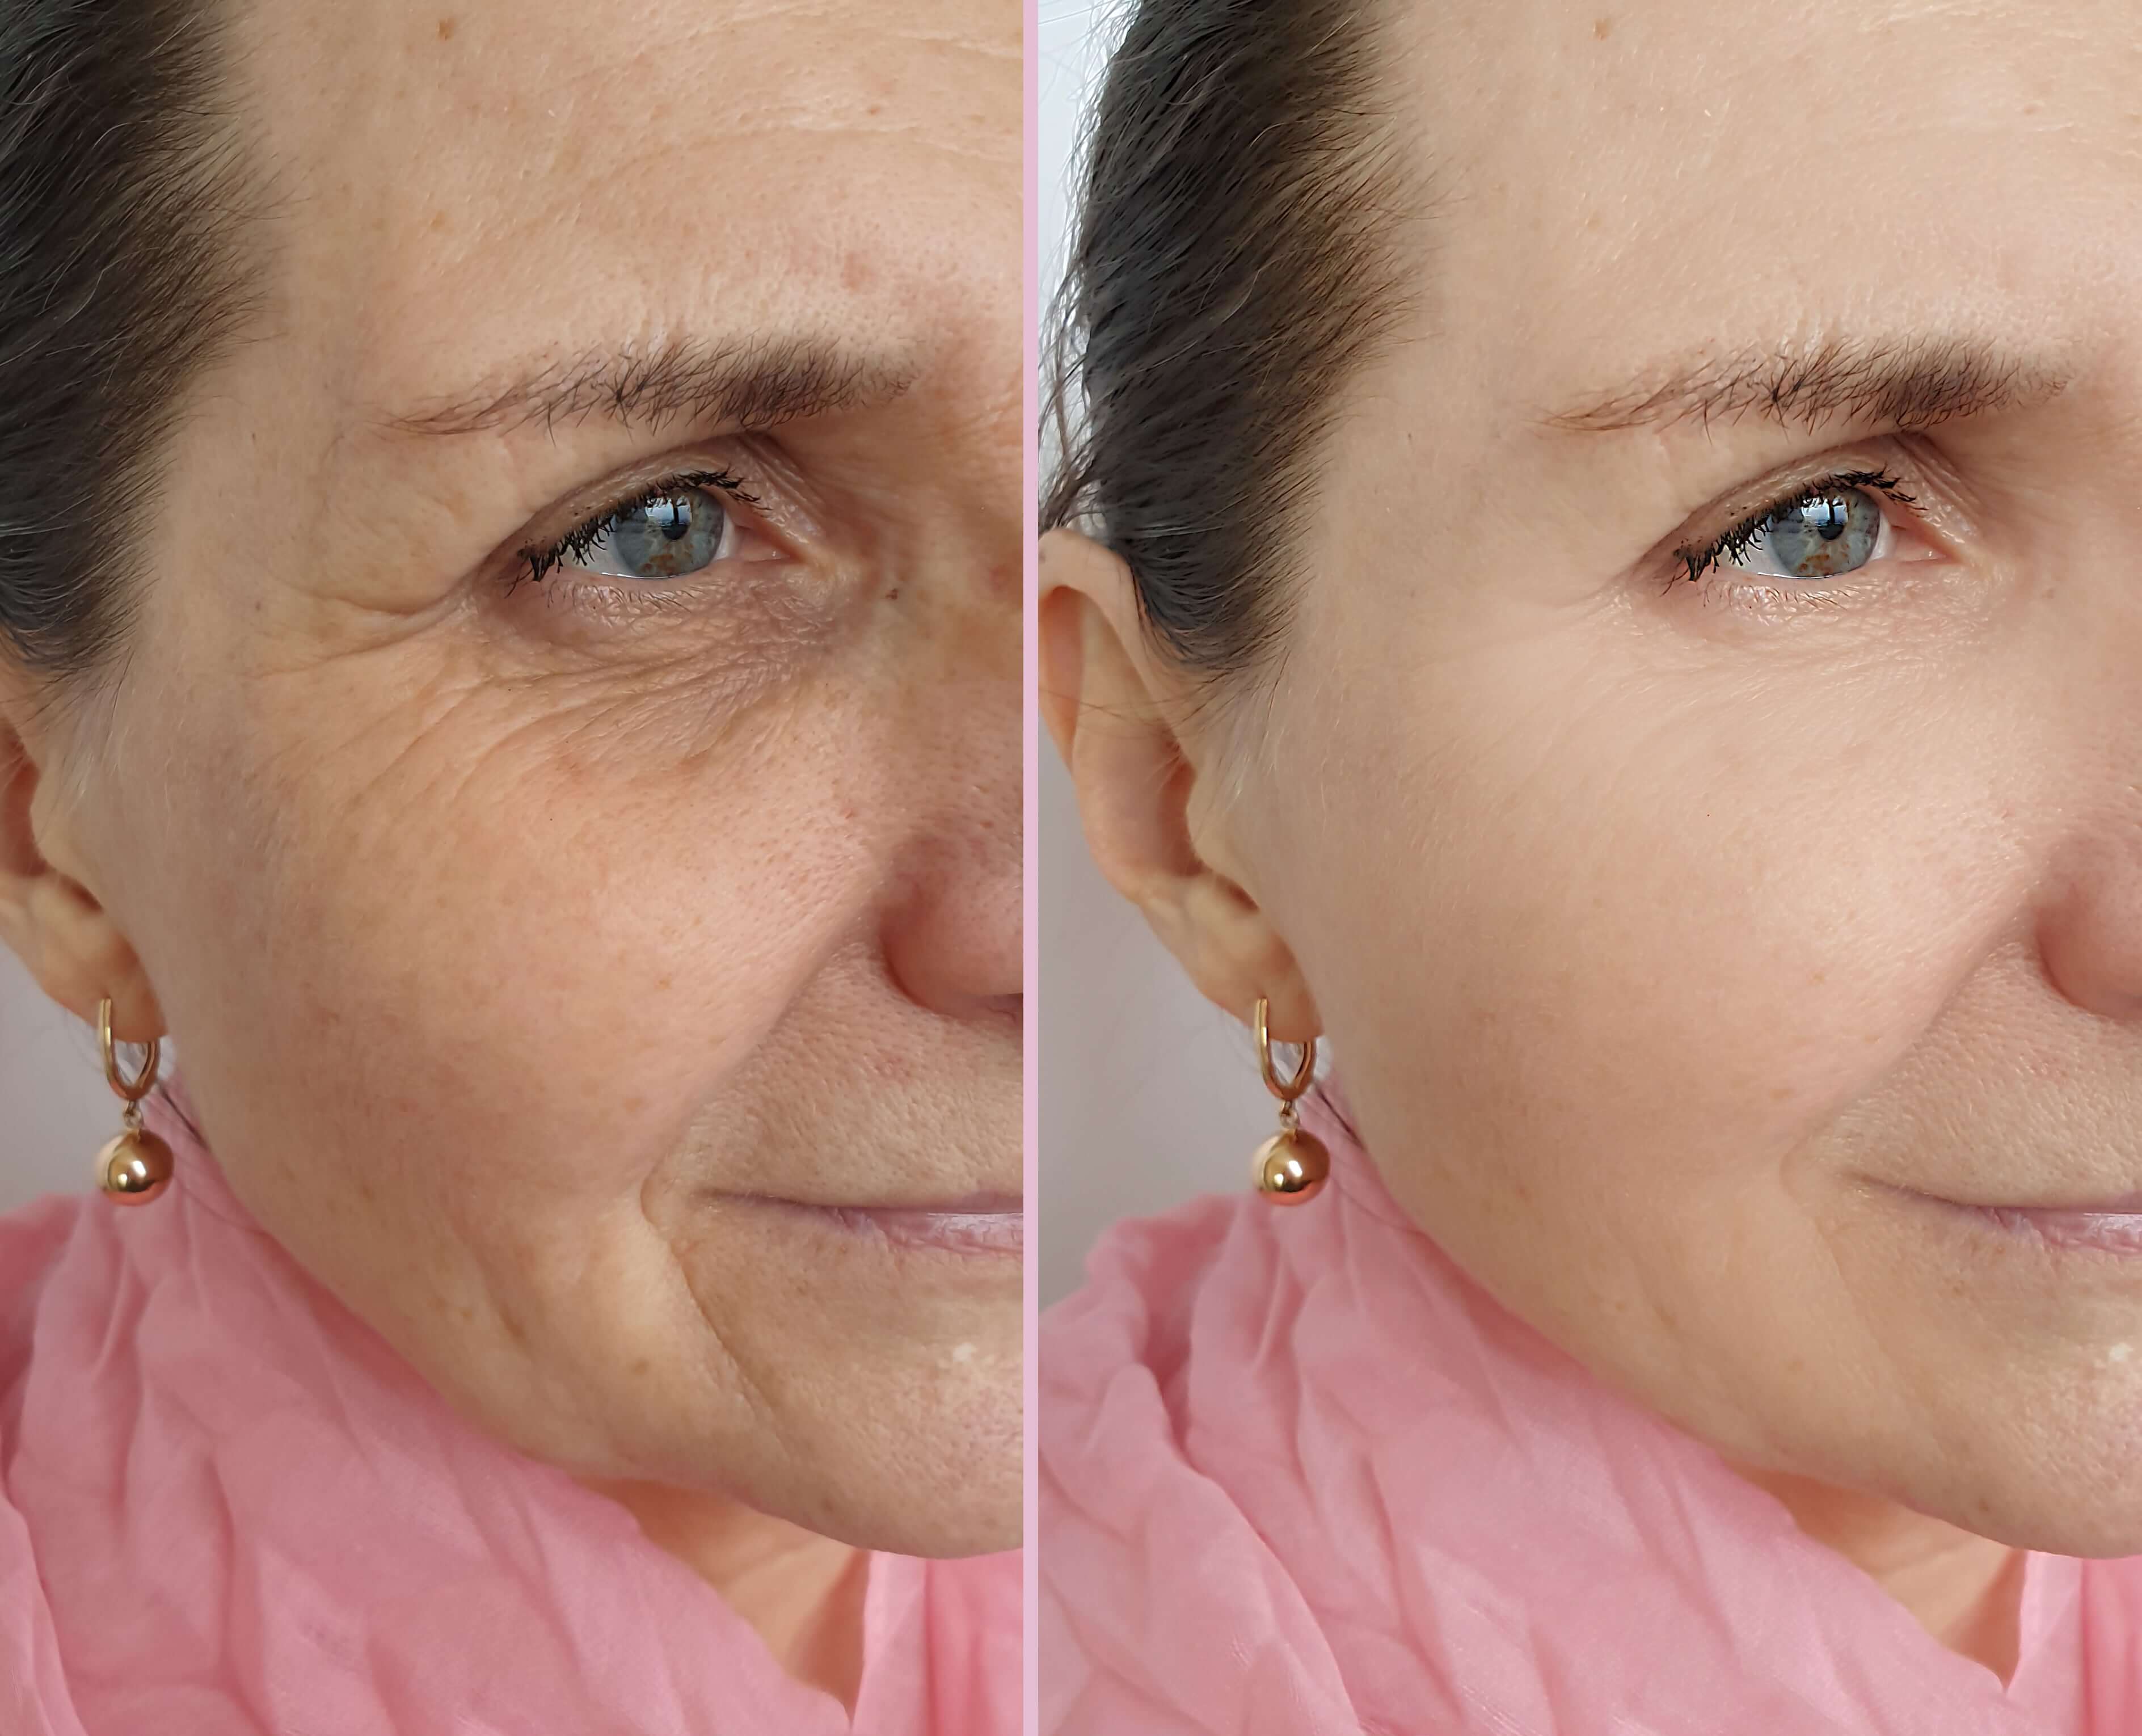 Laser skin resurfacing before and after to treat wrinkles.